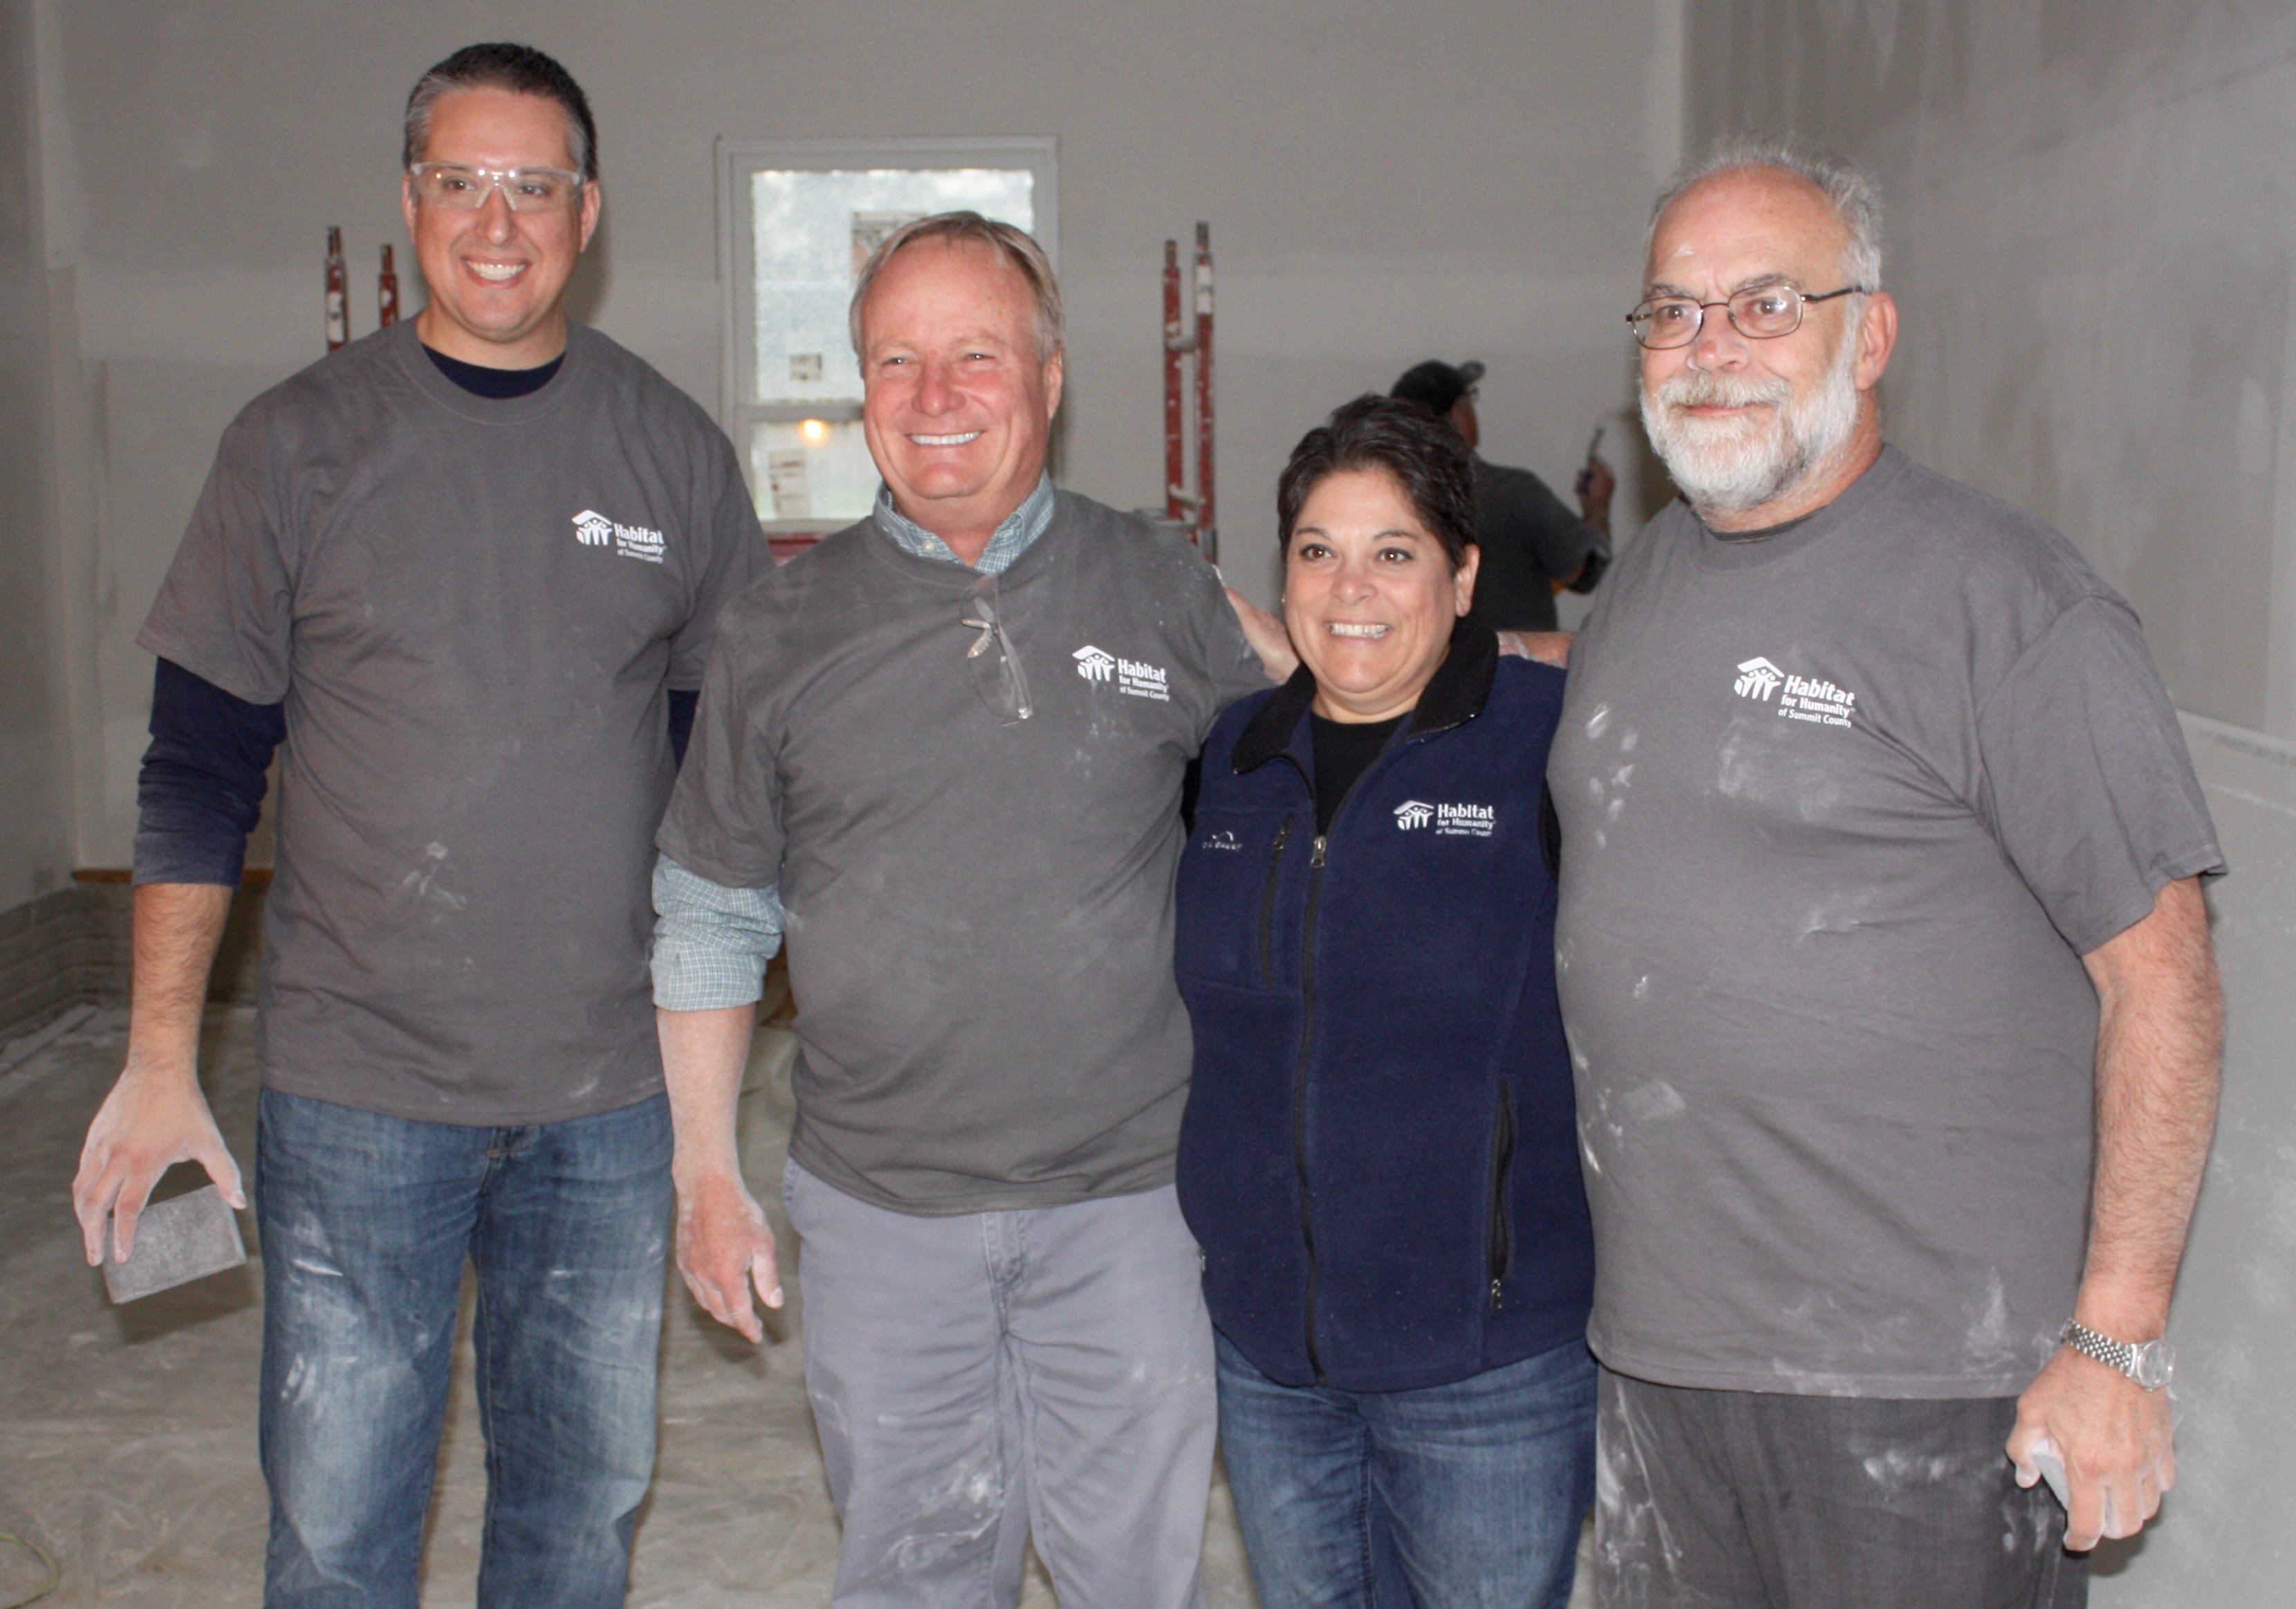 The 14th District Representative Dave Joyce visits Habitat for Humanity of Summit County build site in Twinsburg